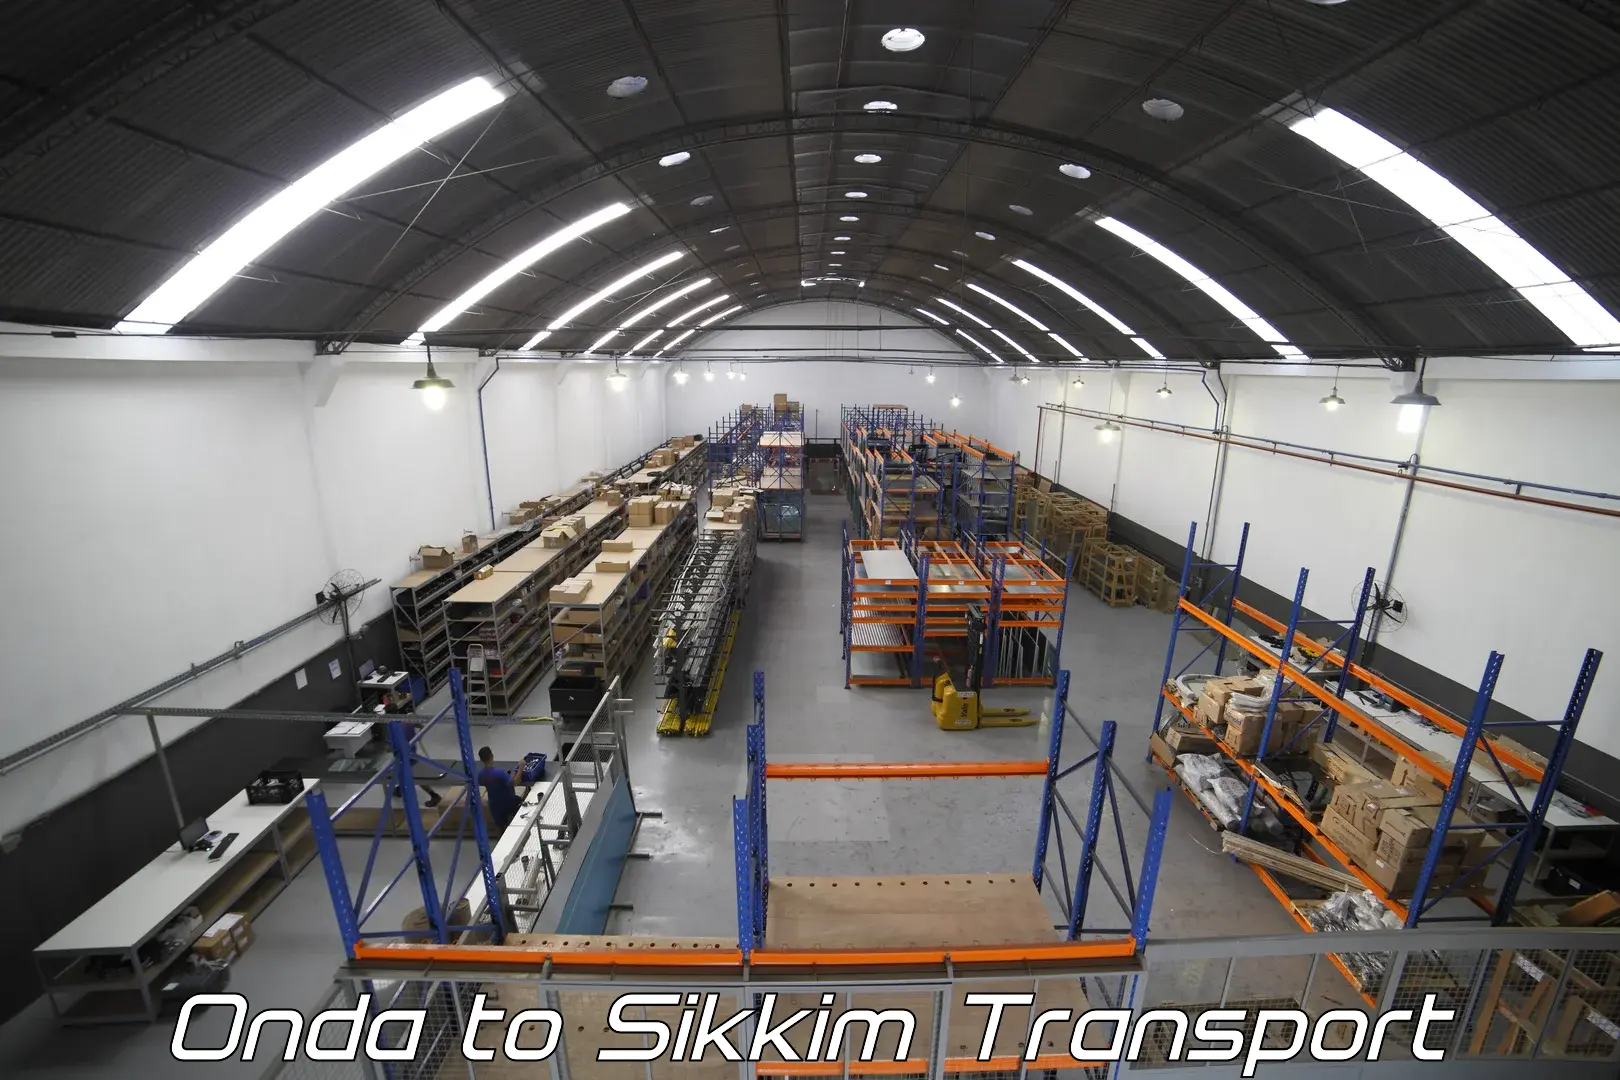 Container transport service Onda to Sikkim